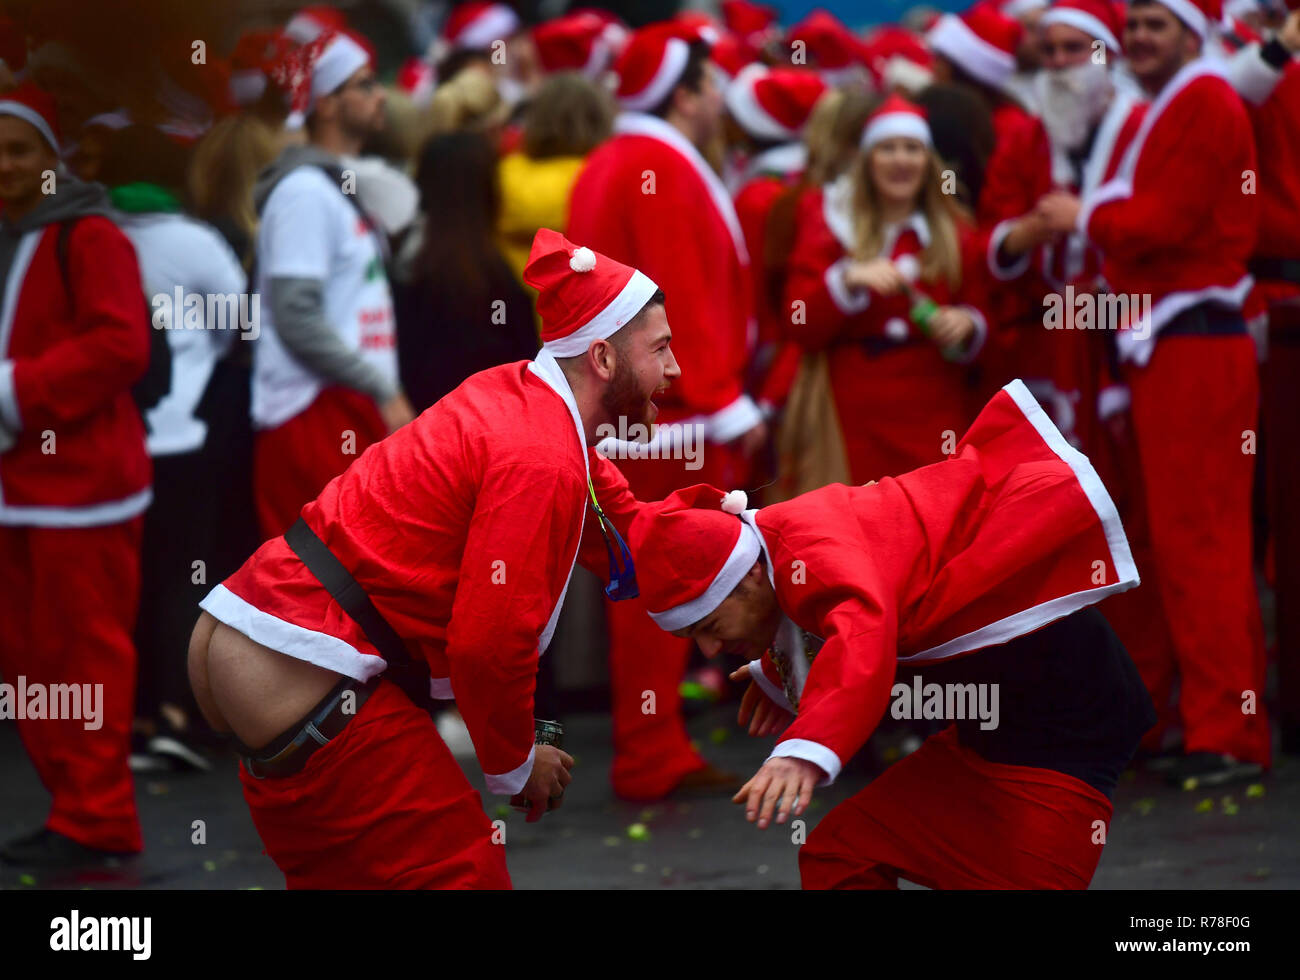 Participants in Santa costumes outside London King's Cross railway station as they make their way through the streets of London as they take part in Santacon London 2018. Stock Photo